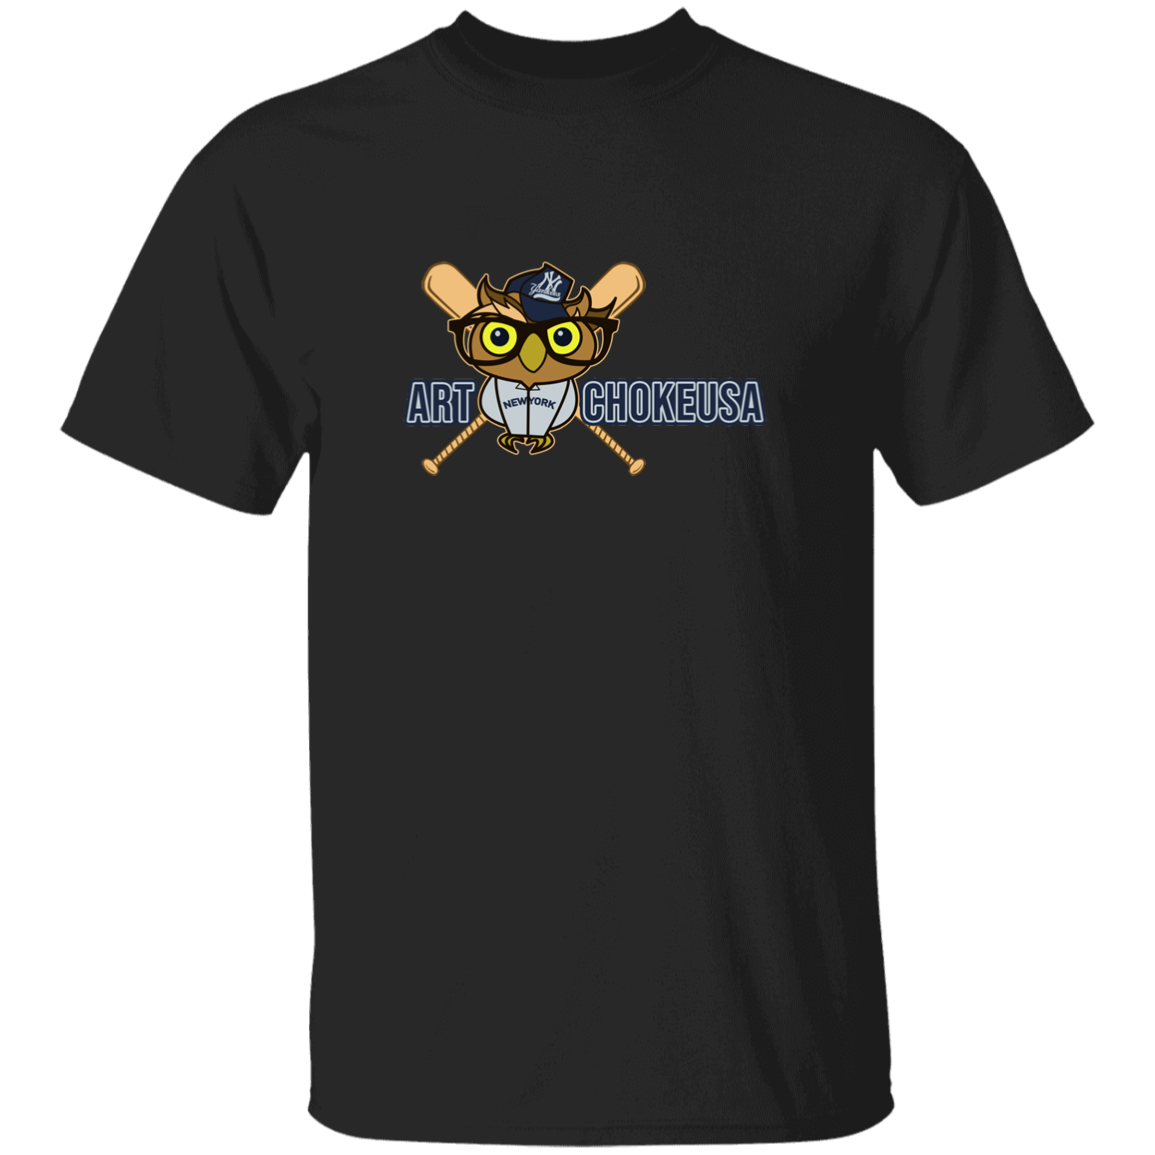 ArtichokeUSA Character and Font design. New York Owl. NY Yankees Fan Art. Let's Create Your Own Team Design Today. Youth 5.3 oz 100% Cotton T-Shirt